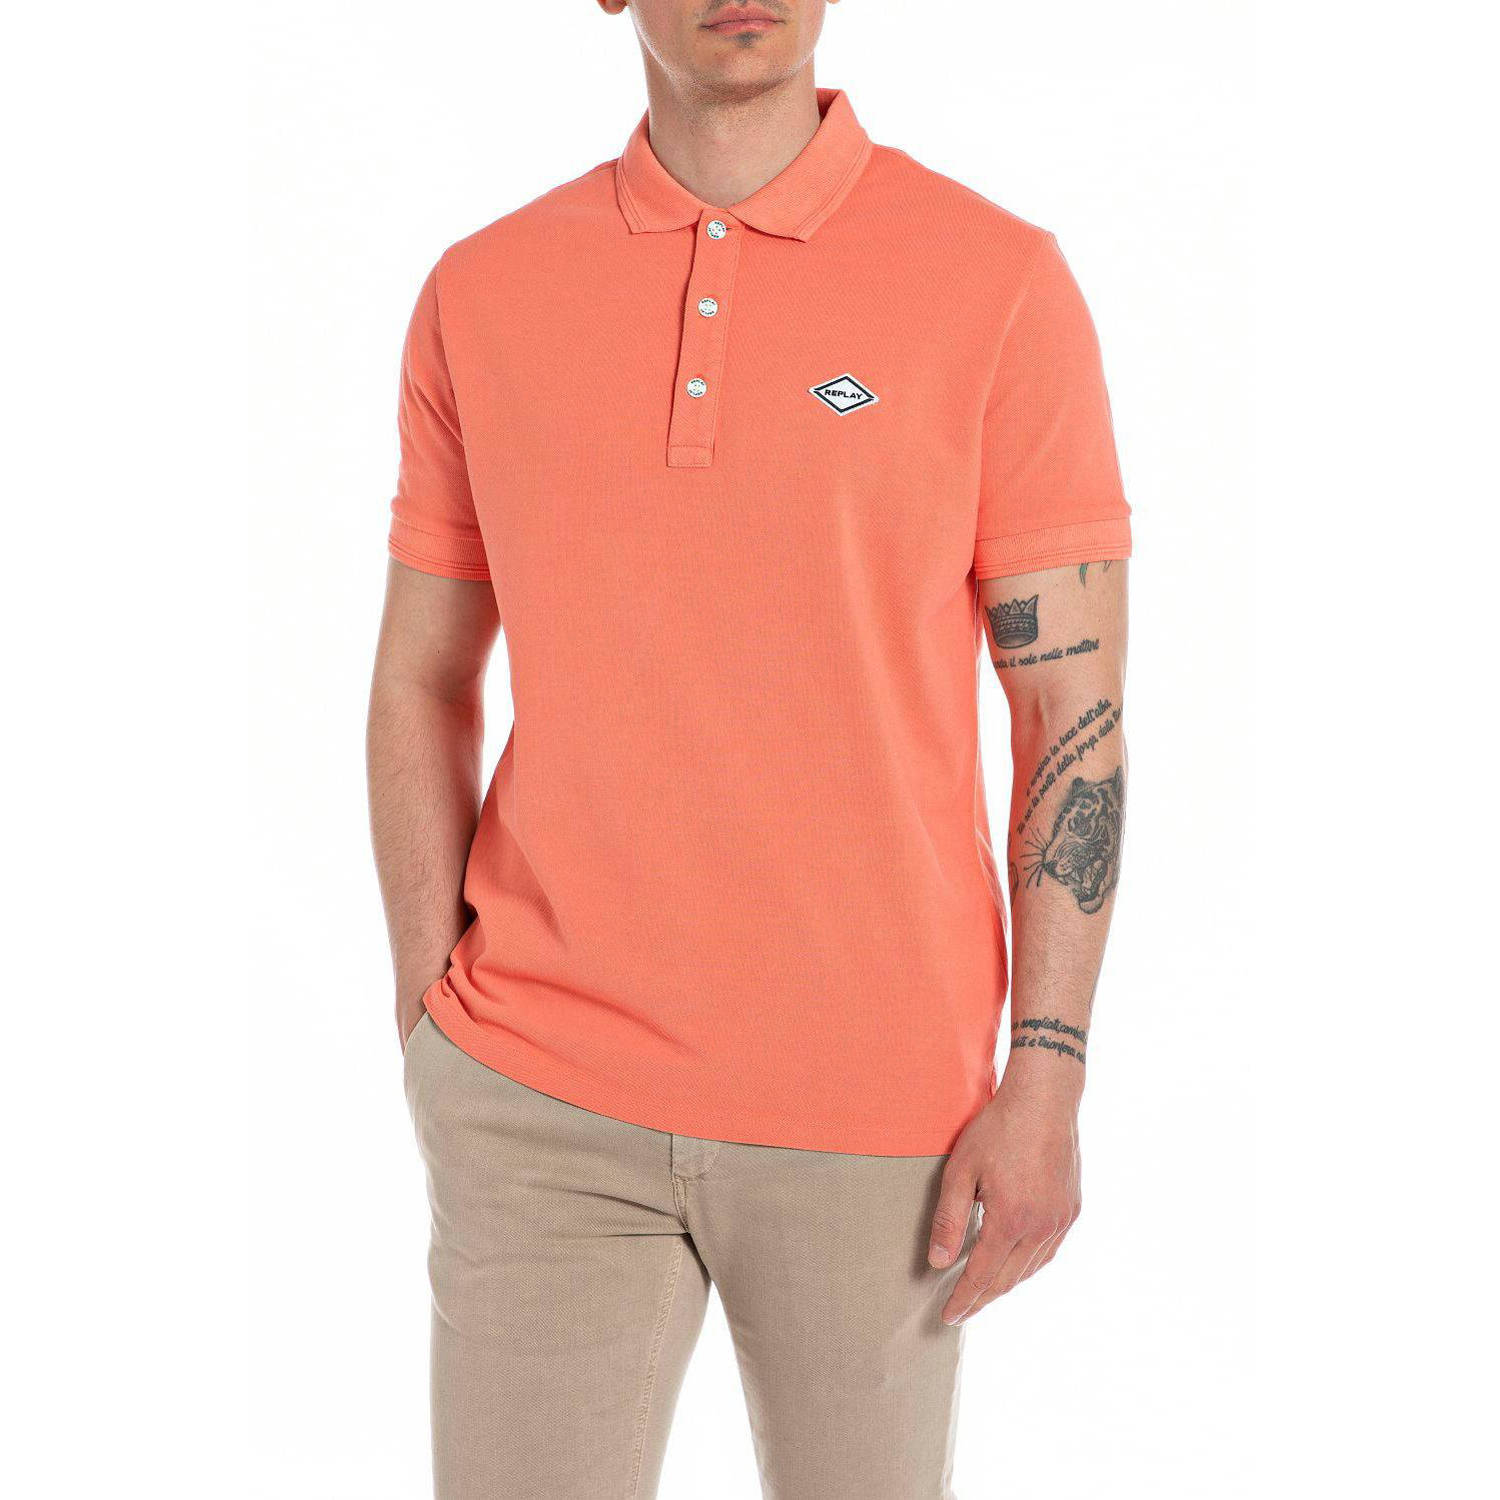 REPLAY polo met logo 051 coral pink